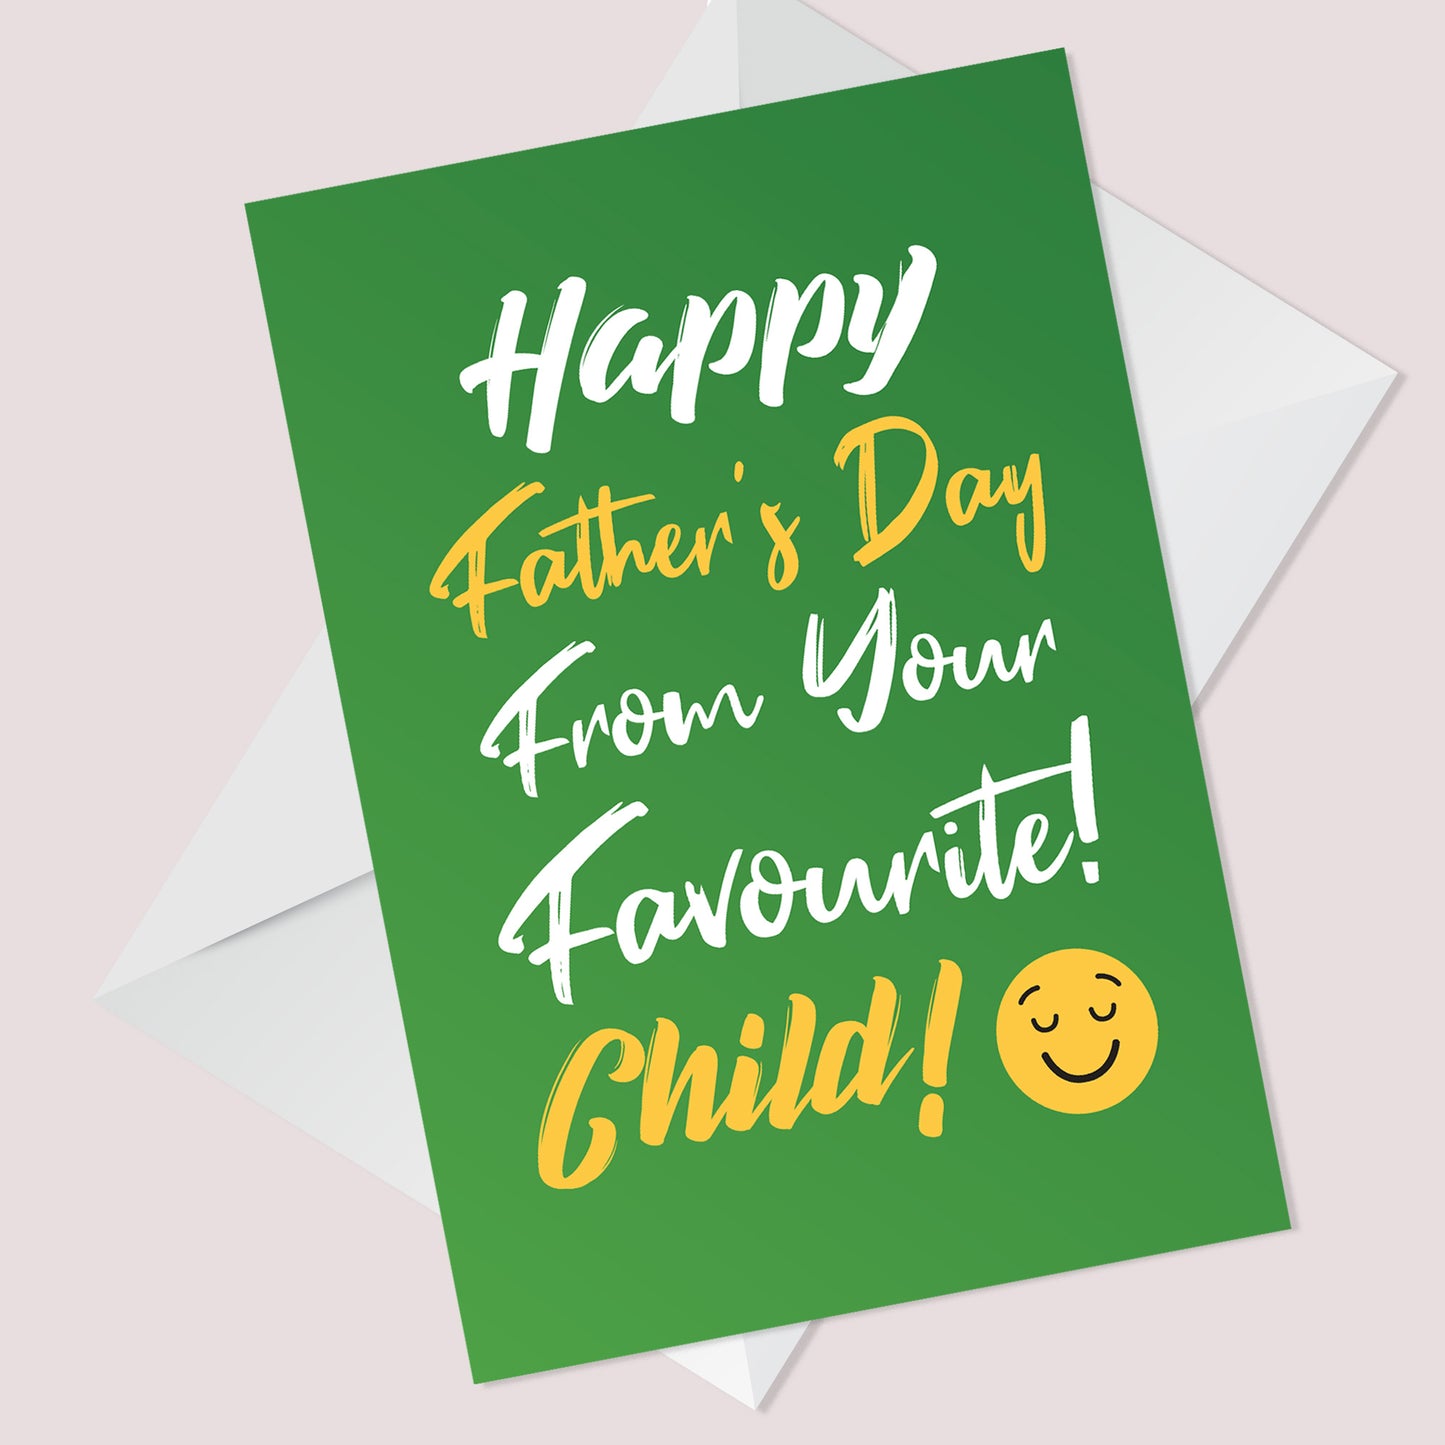 Funny Fathers Day Card From Favourite Child Joke Card